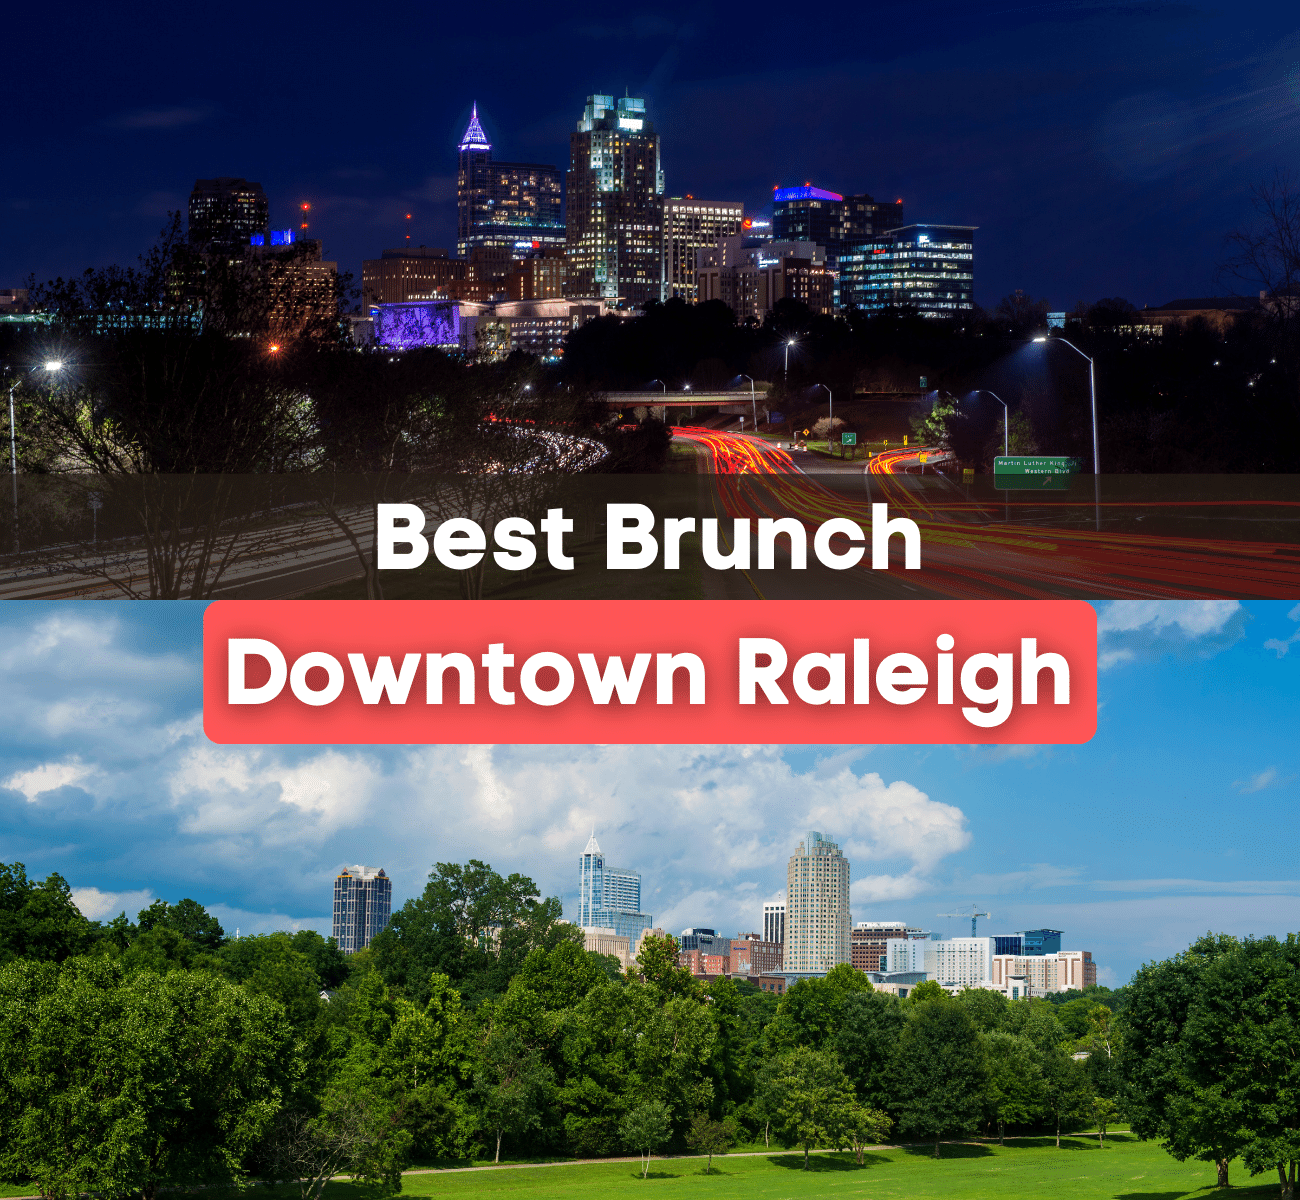 10 Best Brunch Spots in Downtown Raleigh for 2023